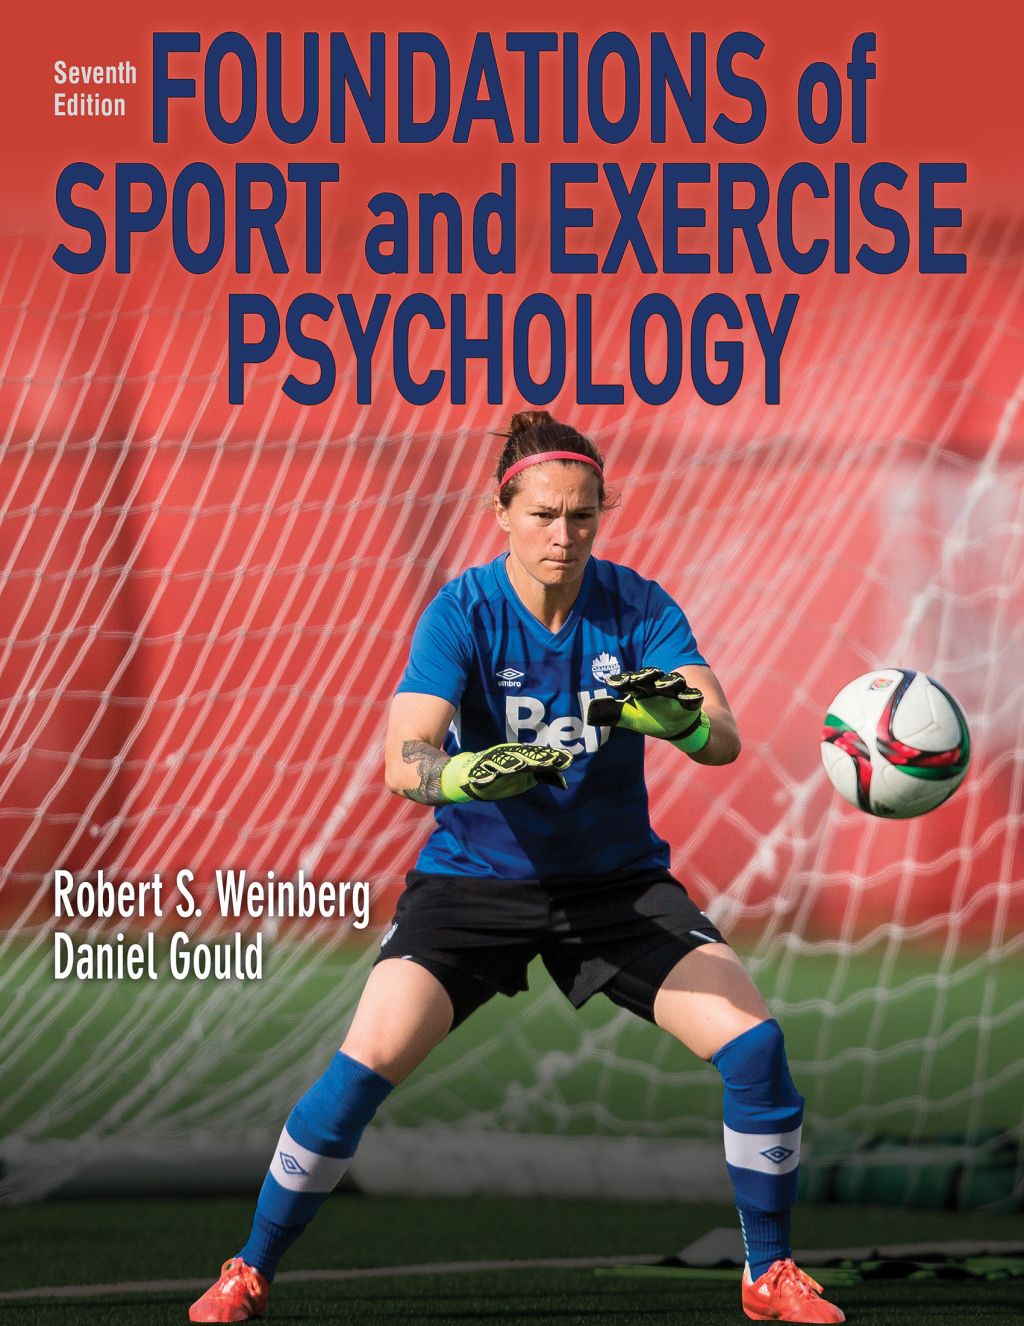 Foundations of Sport and Exercise Psychology book cover